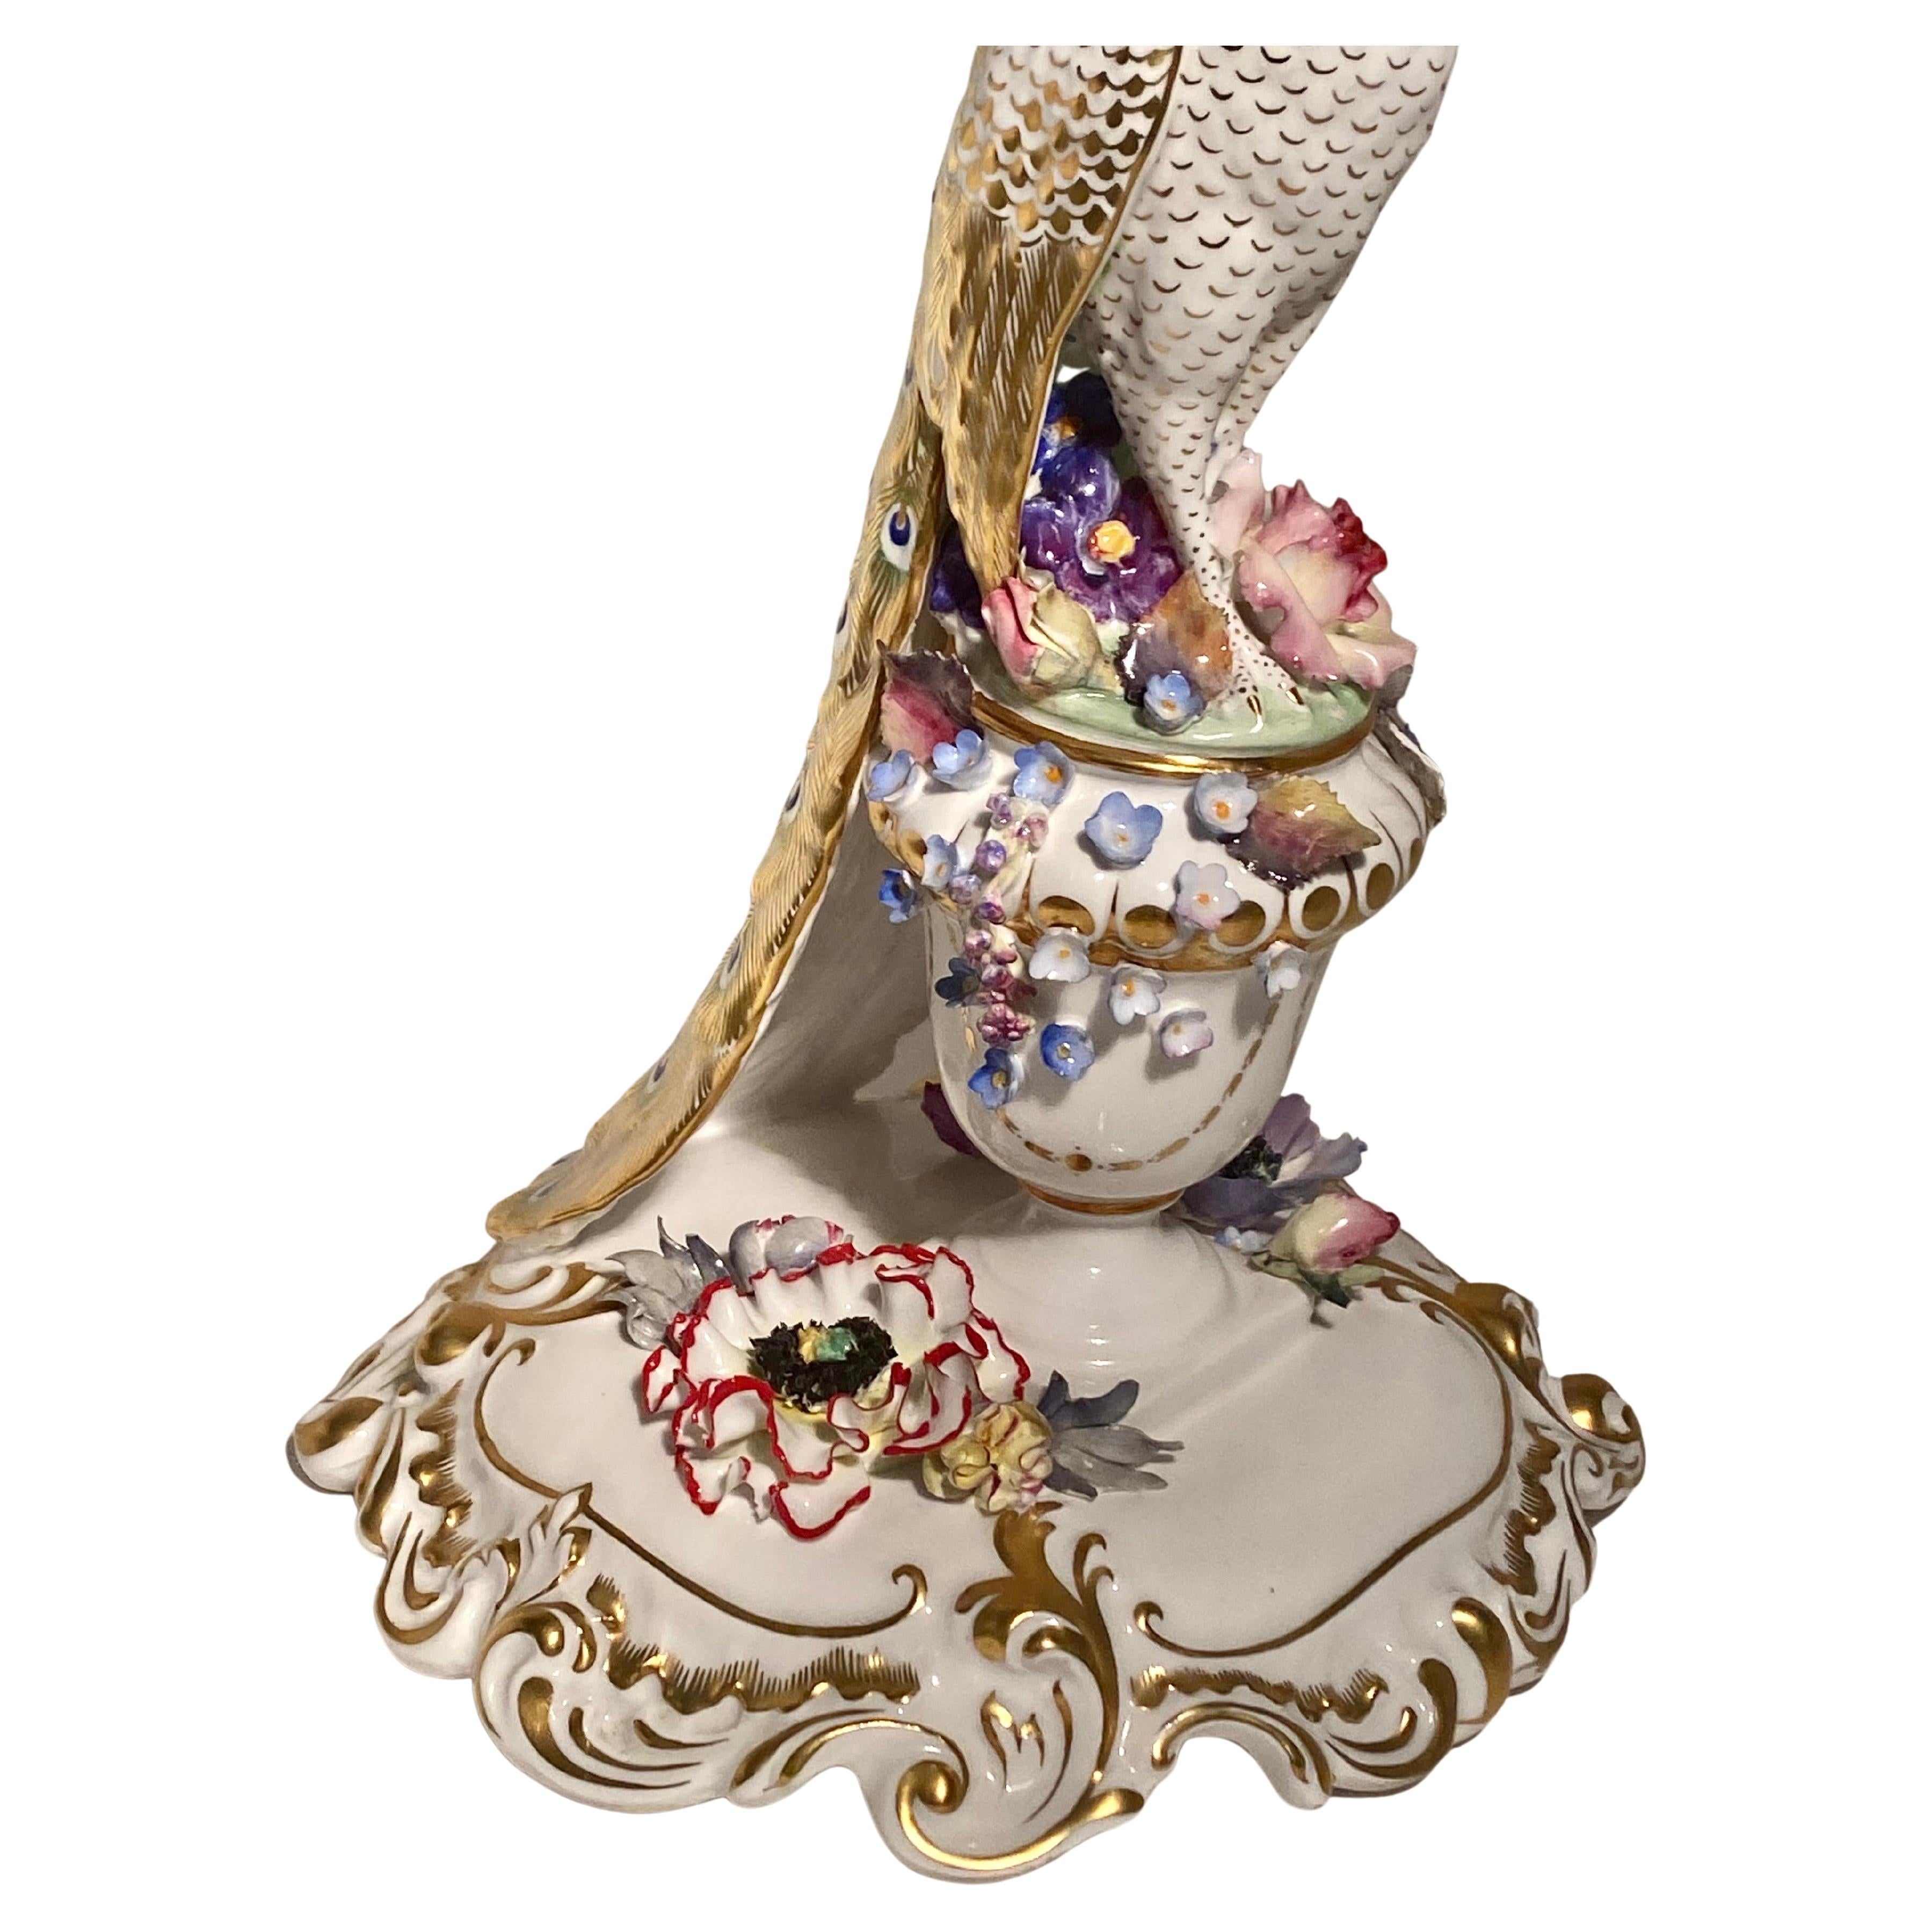 Royal Crown Derby Porcelain Figure, Modelled as a Peacock For Sale 4